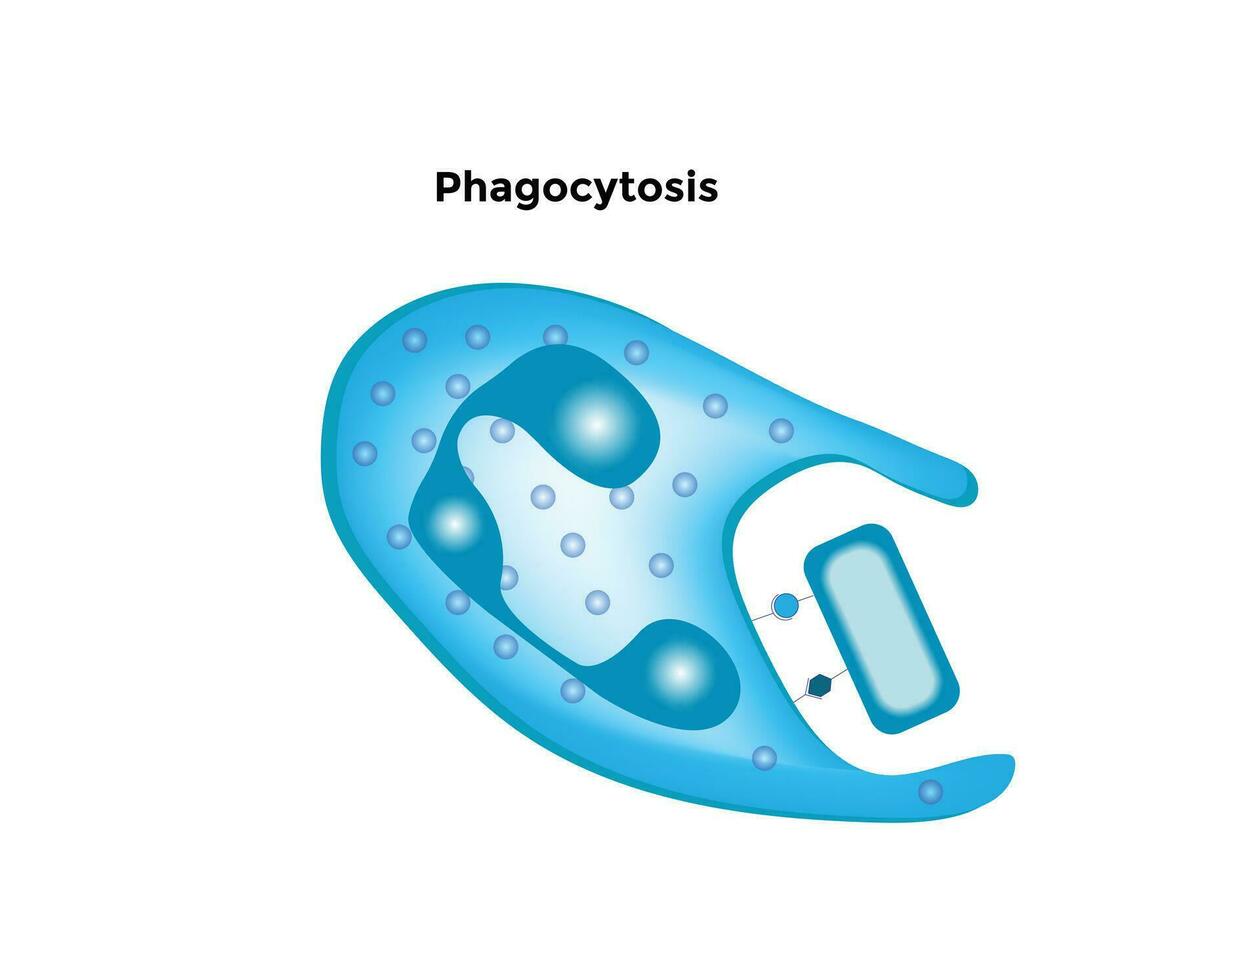 Fibroblast, a cell in the dermis, Connective tissue cell, Fibrosis. Simple structure of Human fibroblast cell. Vector illustration.